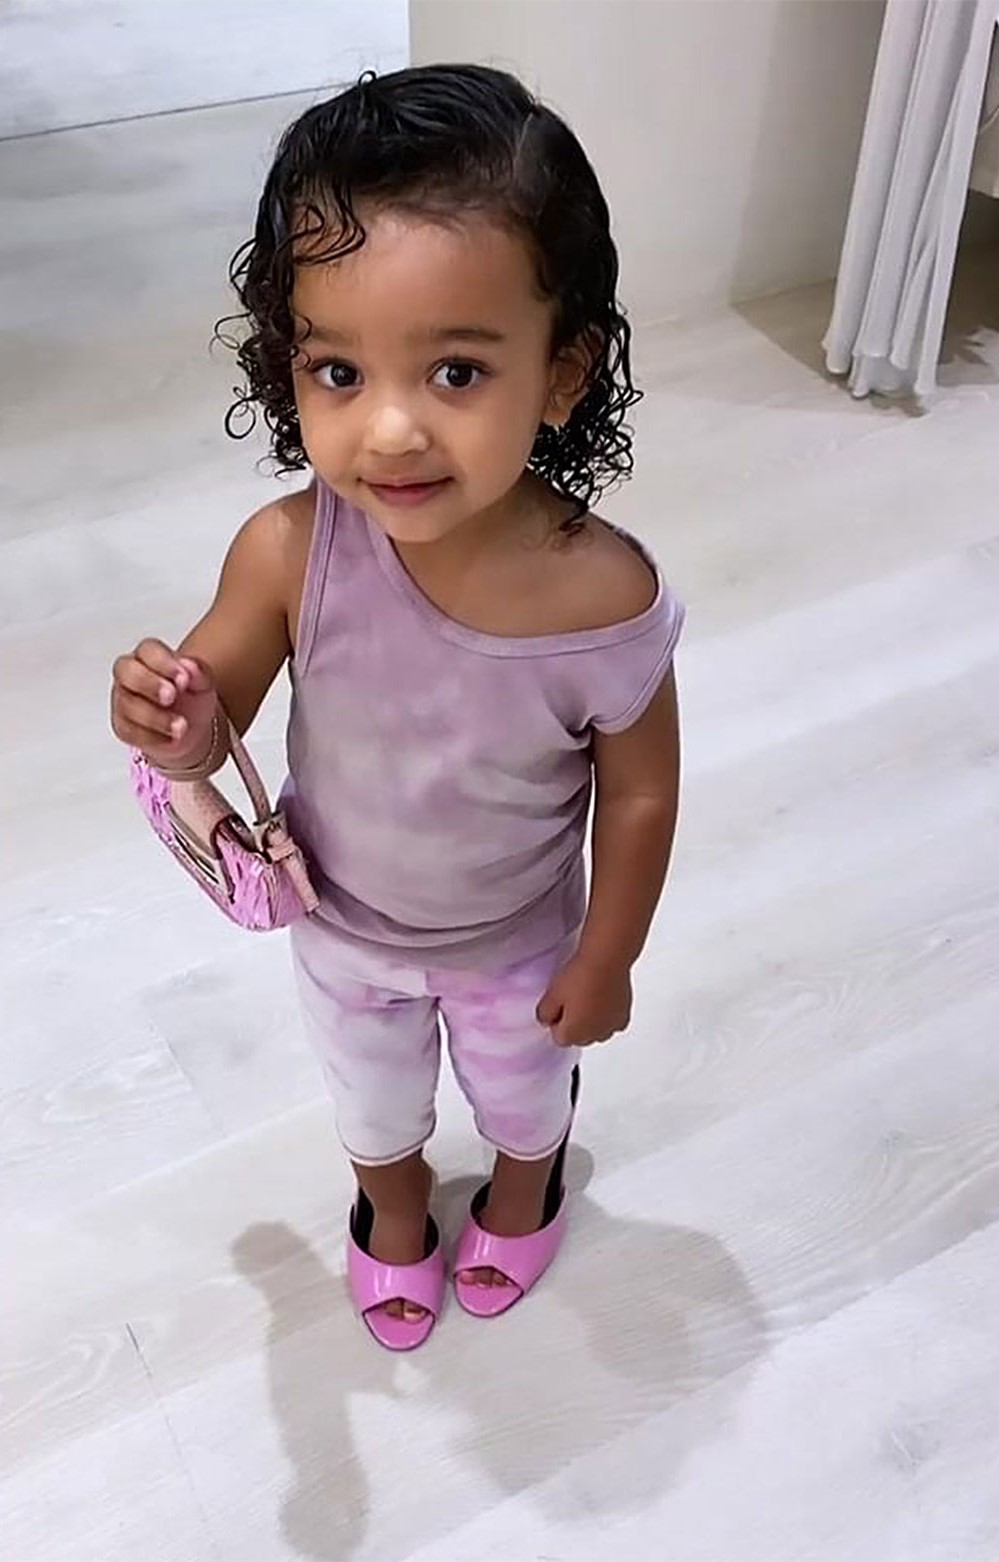 likhoa kim kardashian surprised fans when she first shared rare sweet moments of little girl chicago west she is everything i m most proud of 655dc134310d0 Kim Kardashian Surprised Fans When She First Shared Rare Sweet Moments Of Little Girl Chicago West: 'She Is Everything I'm Most Proud Of'